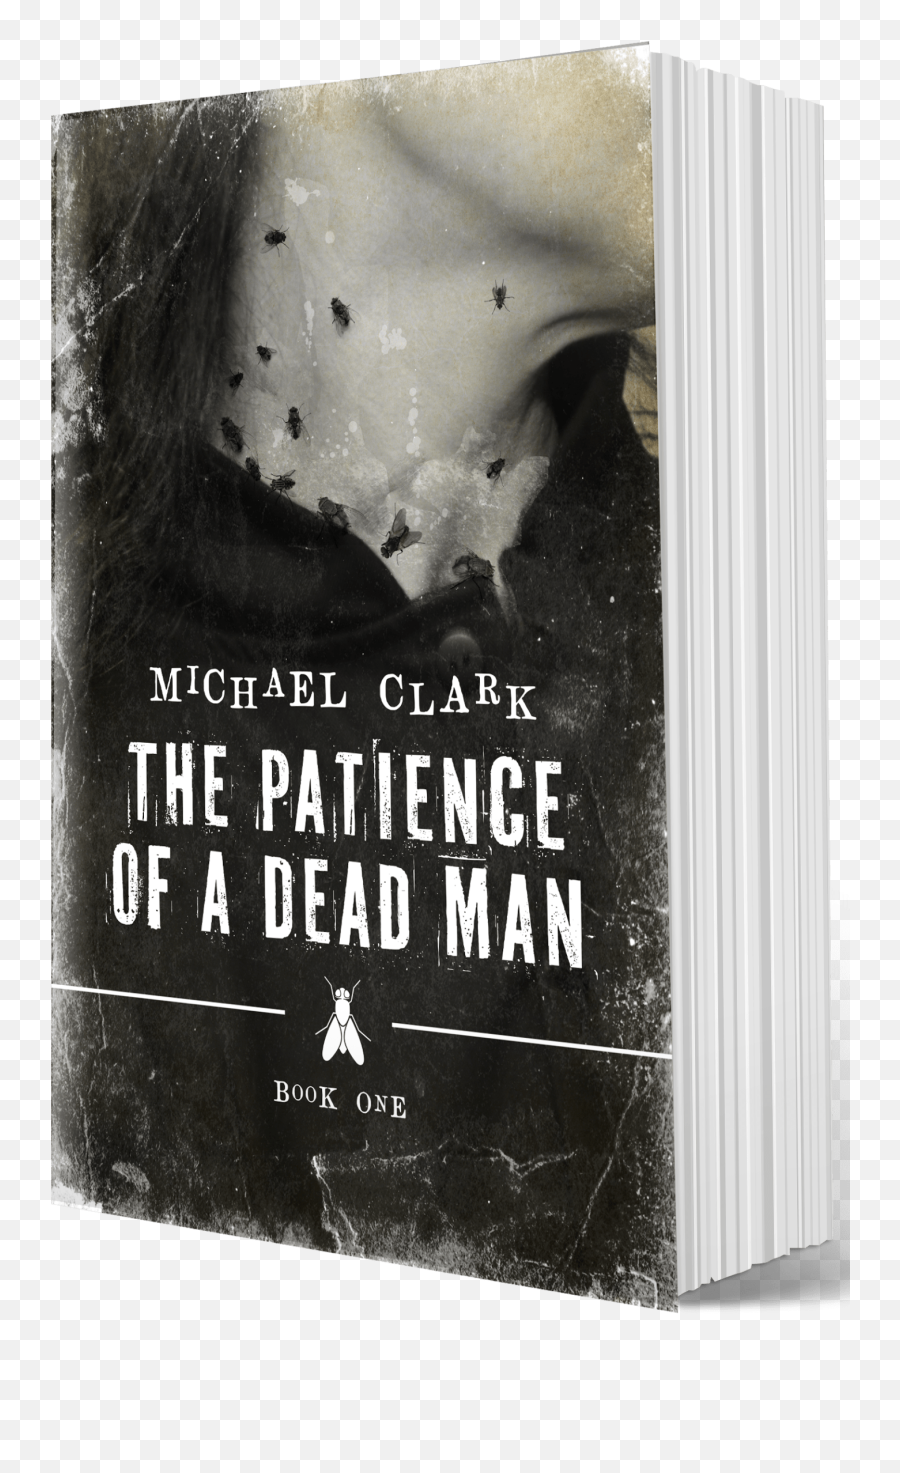 Paranormal Fiction Amieu0027s Book Reviews - Patience Of A Dead Man By Michael Clark Emoji,Stir It Up The Novel Book Pages Emotion Reipes